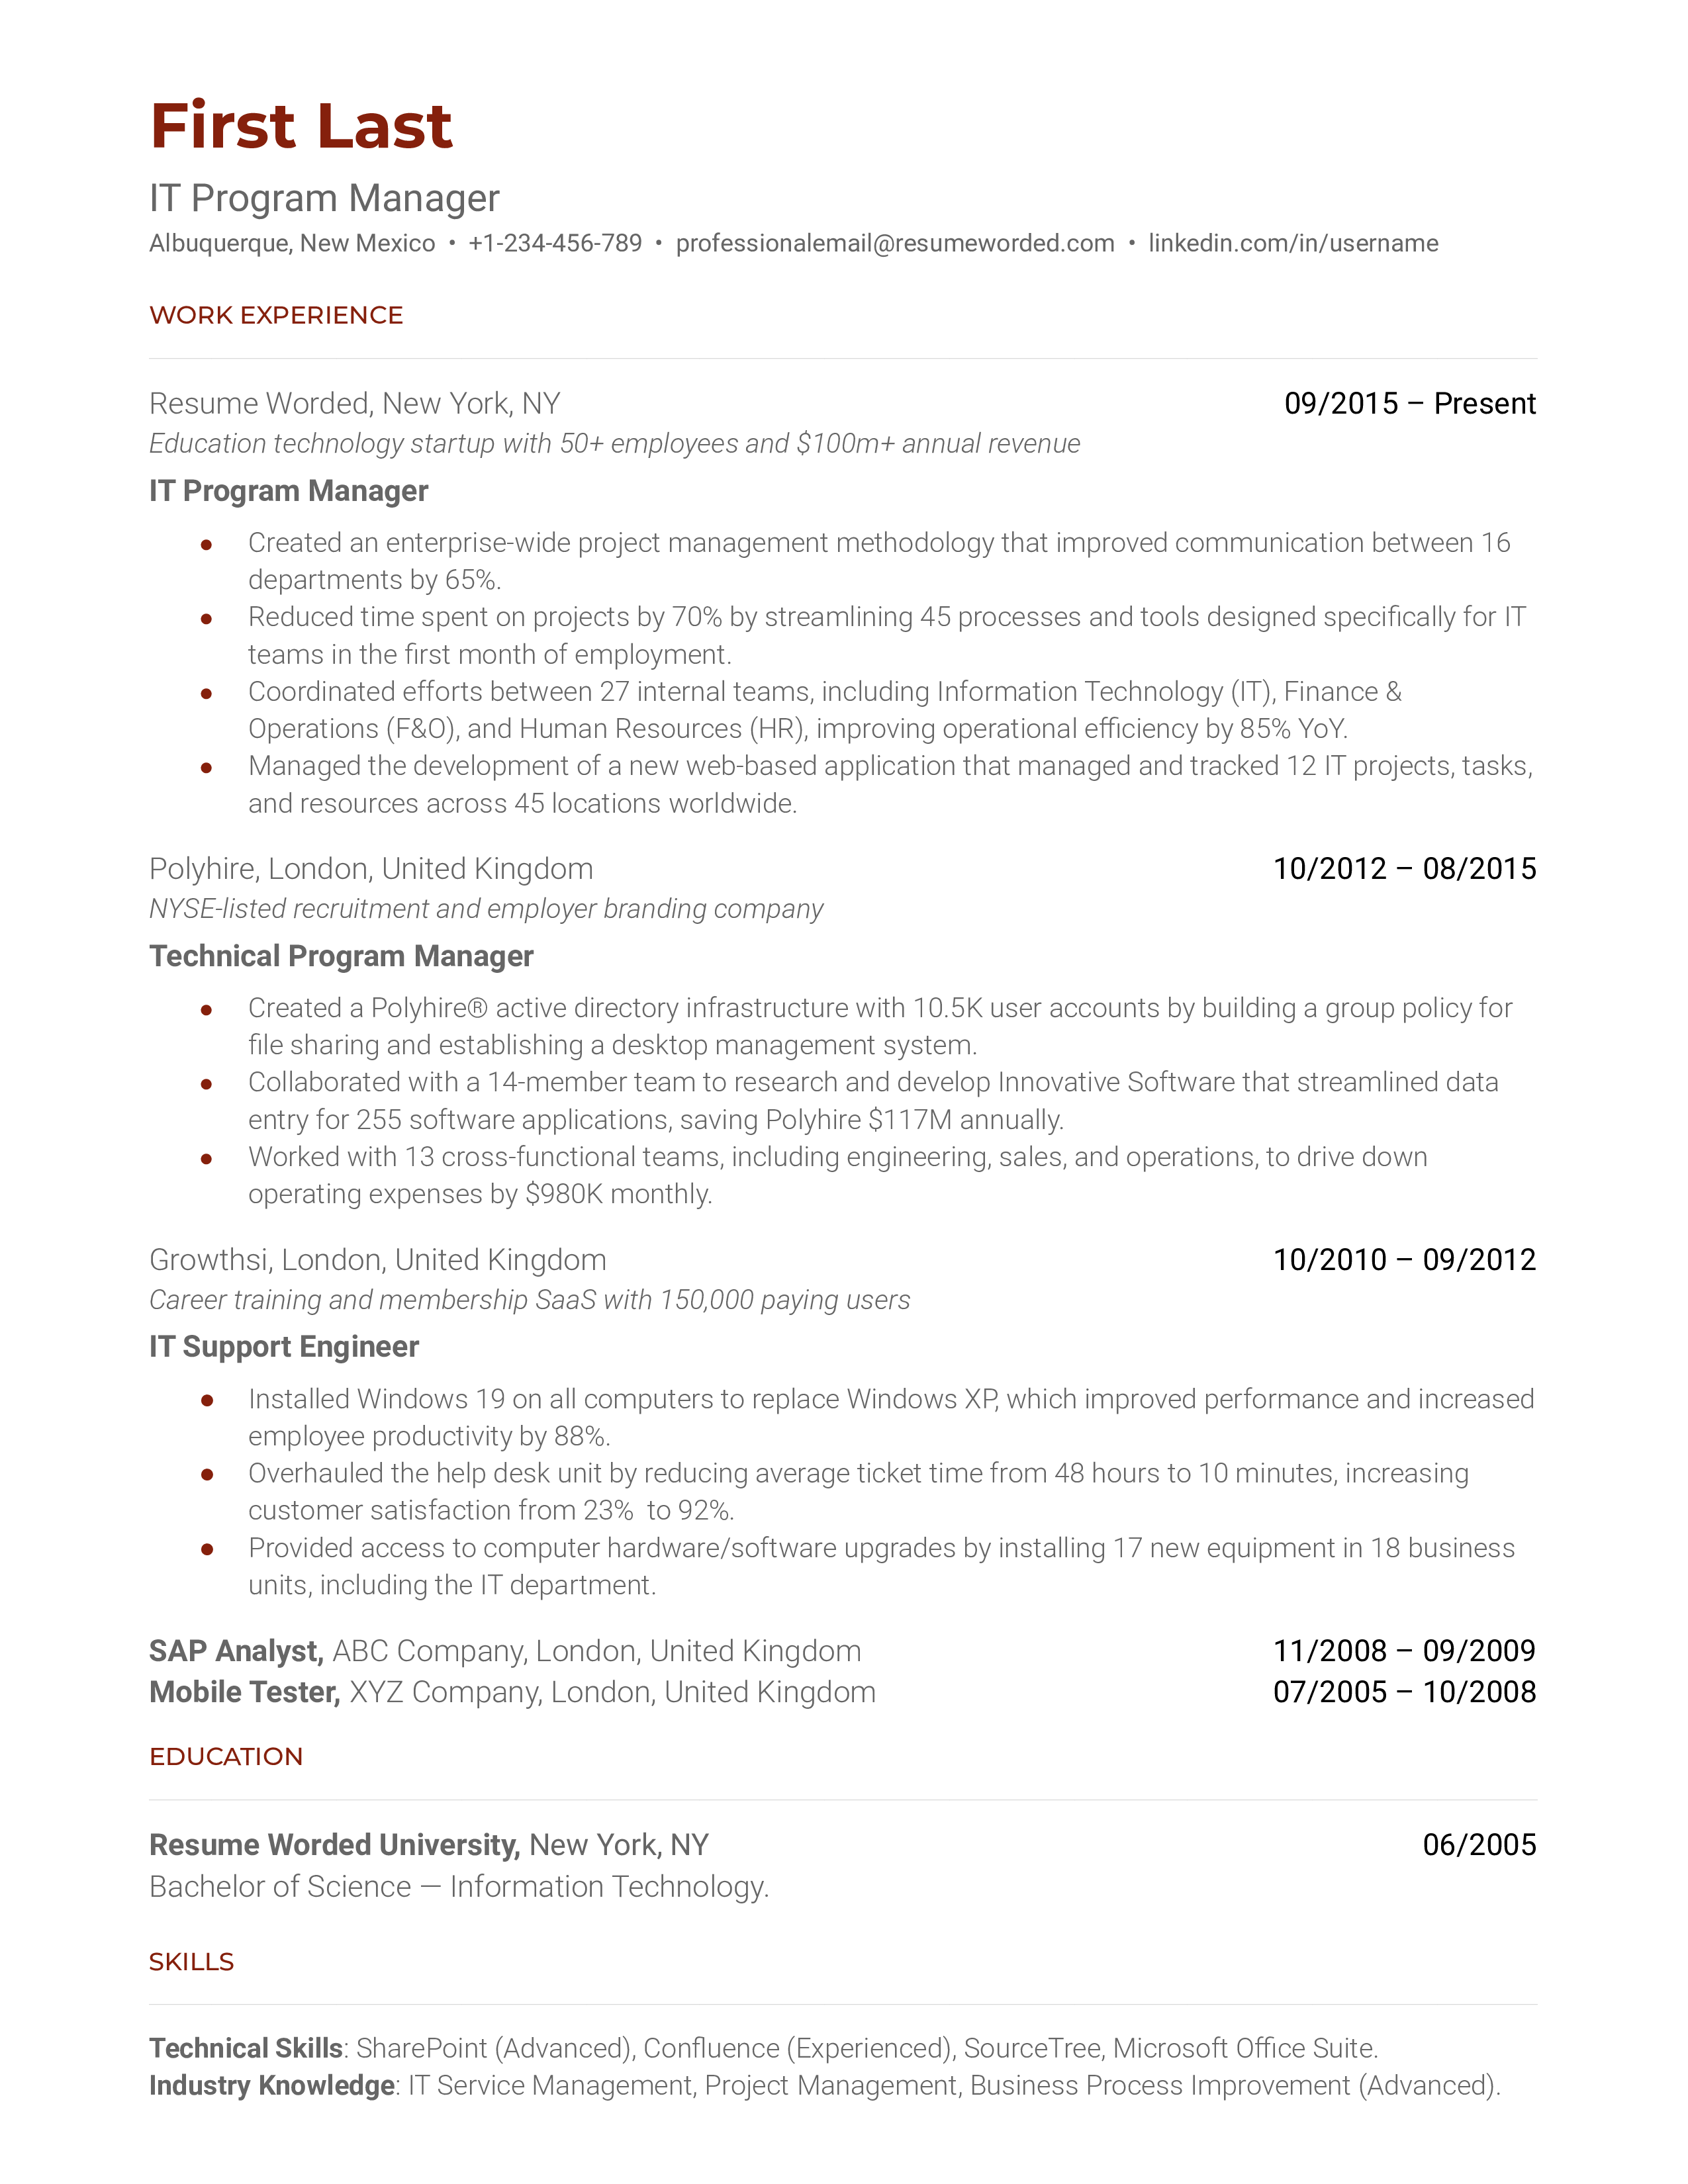 Professional IT Program Manager's CV showcasing technical and strategic expertise.